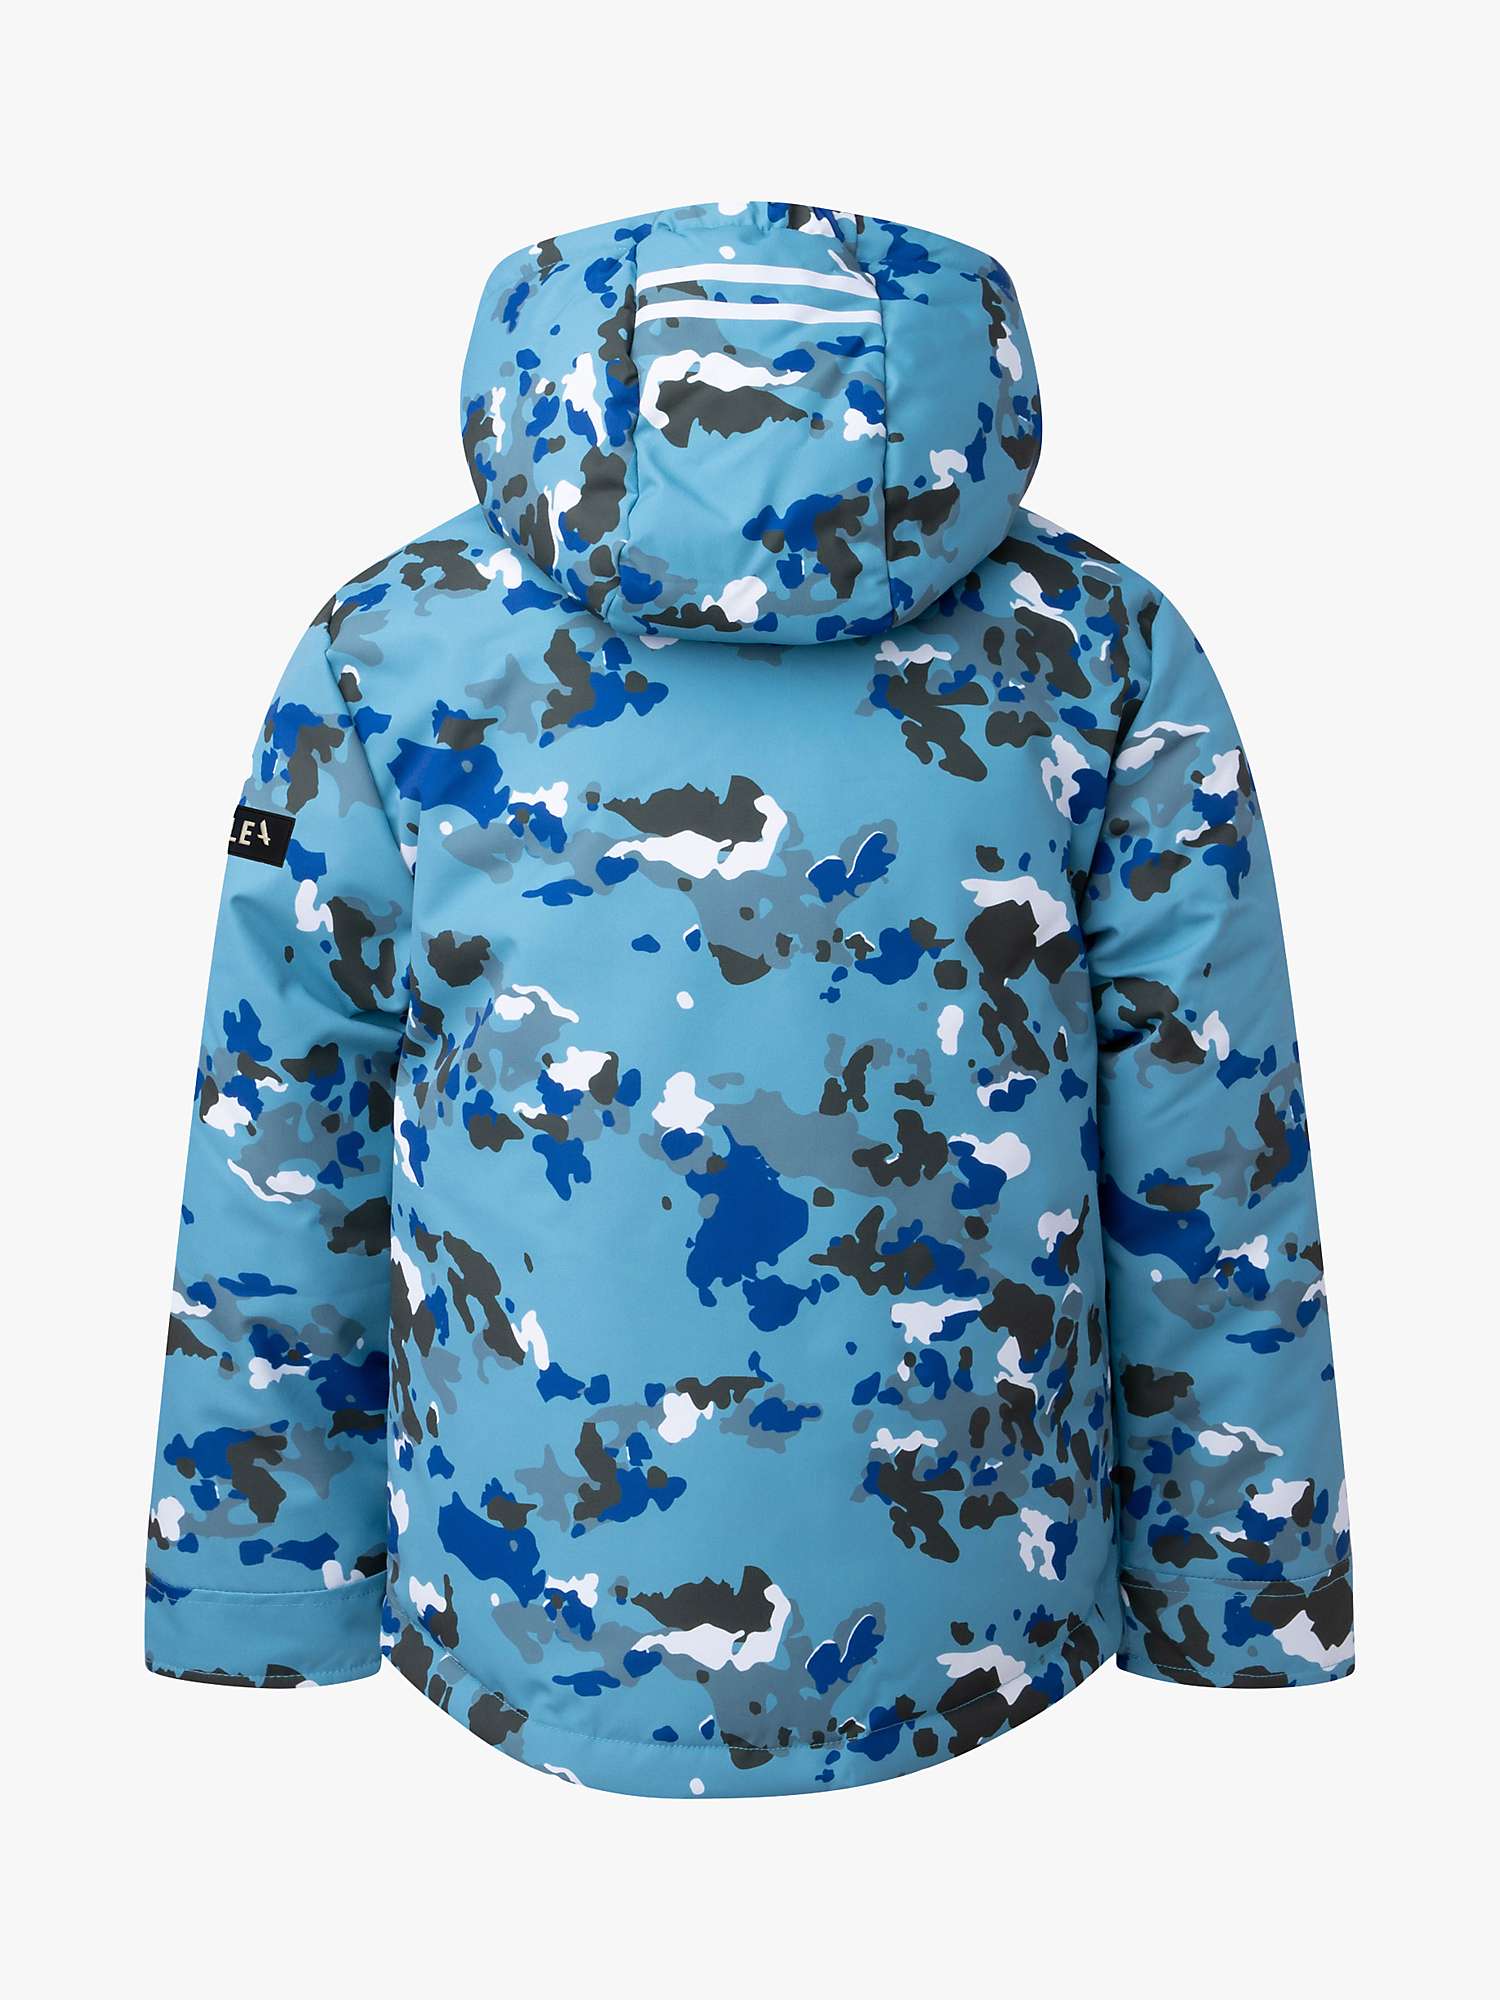 Buy Aigle Kids' Abstract Camouflage Waterproof Parka Coat Online at johnlewis.com